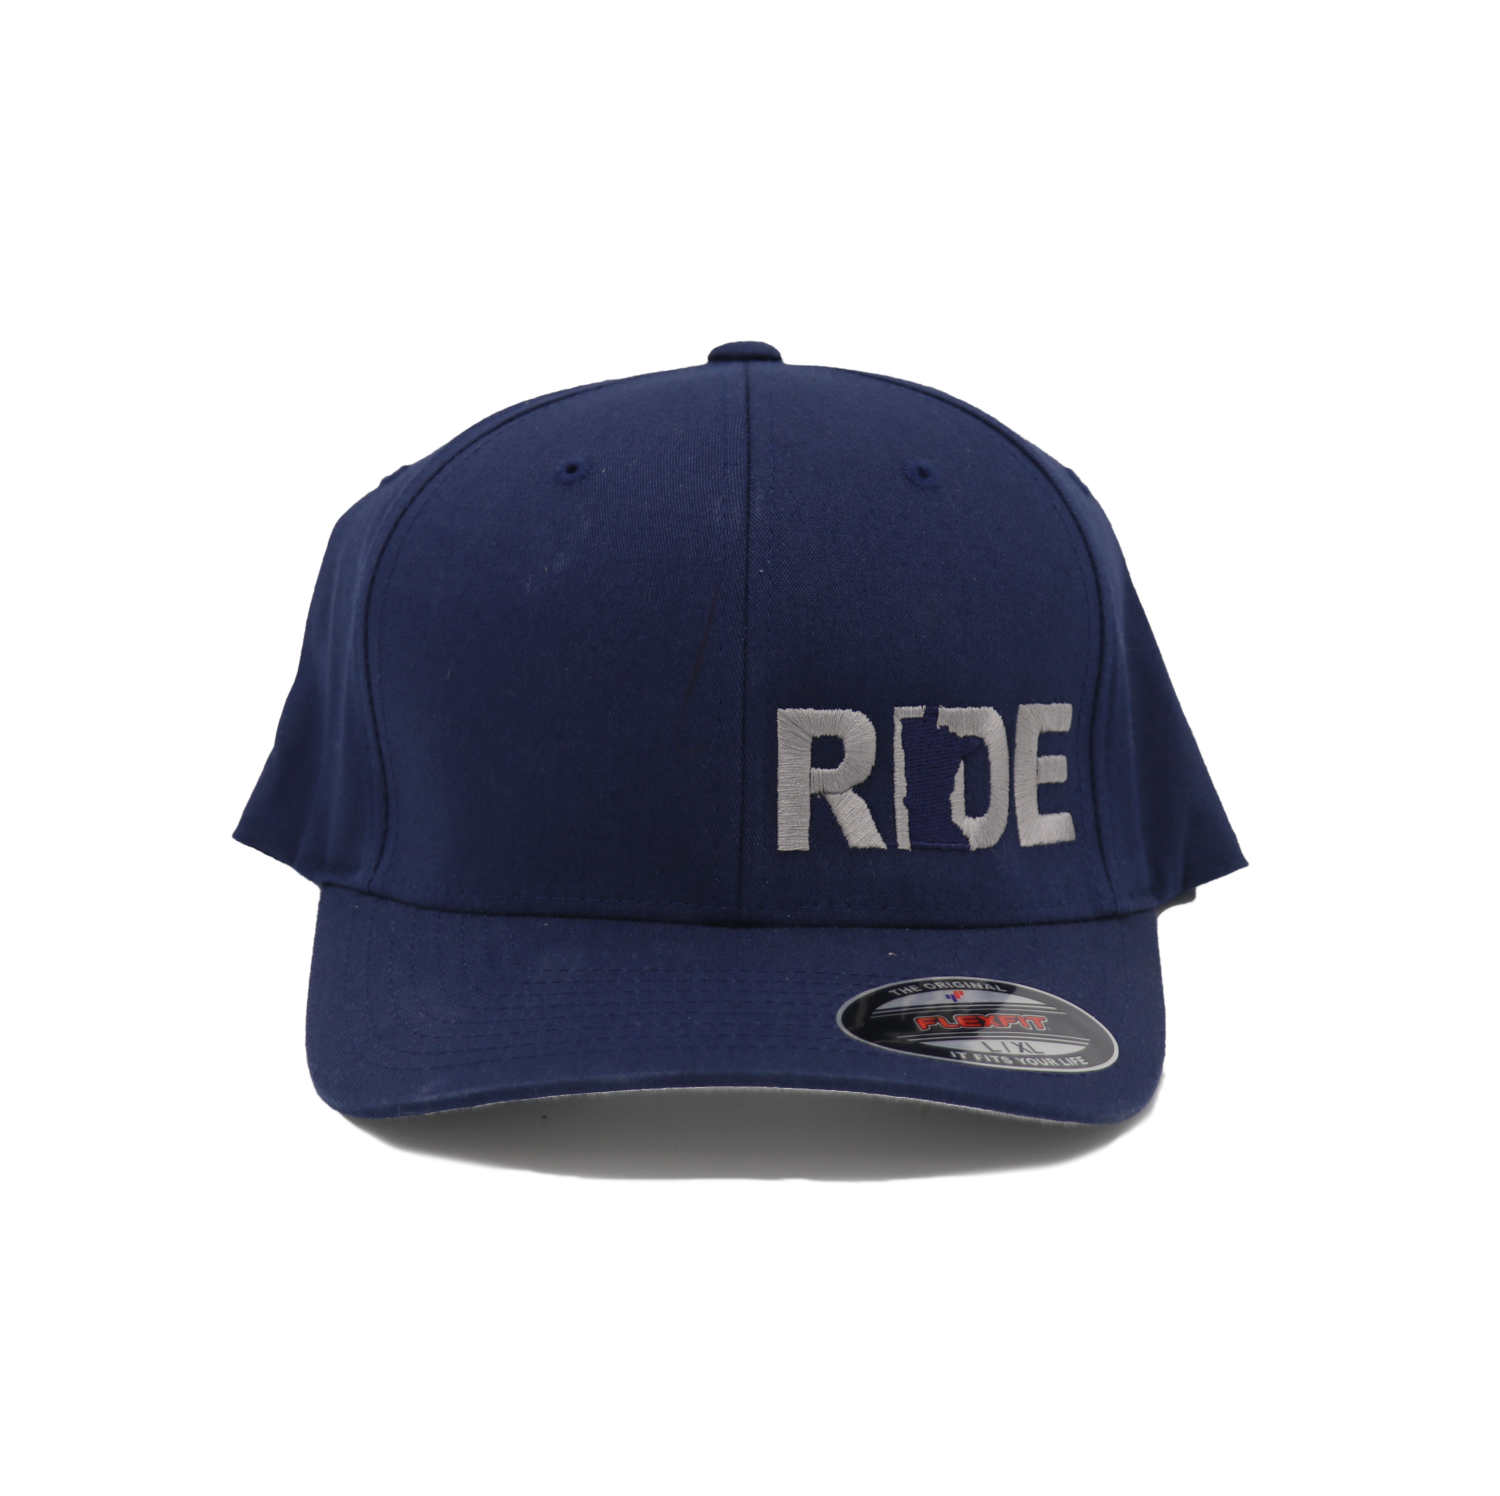 Ride Minnesota Night Out Embroidered Flexfit Hat Navy/Silver